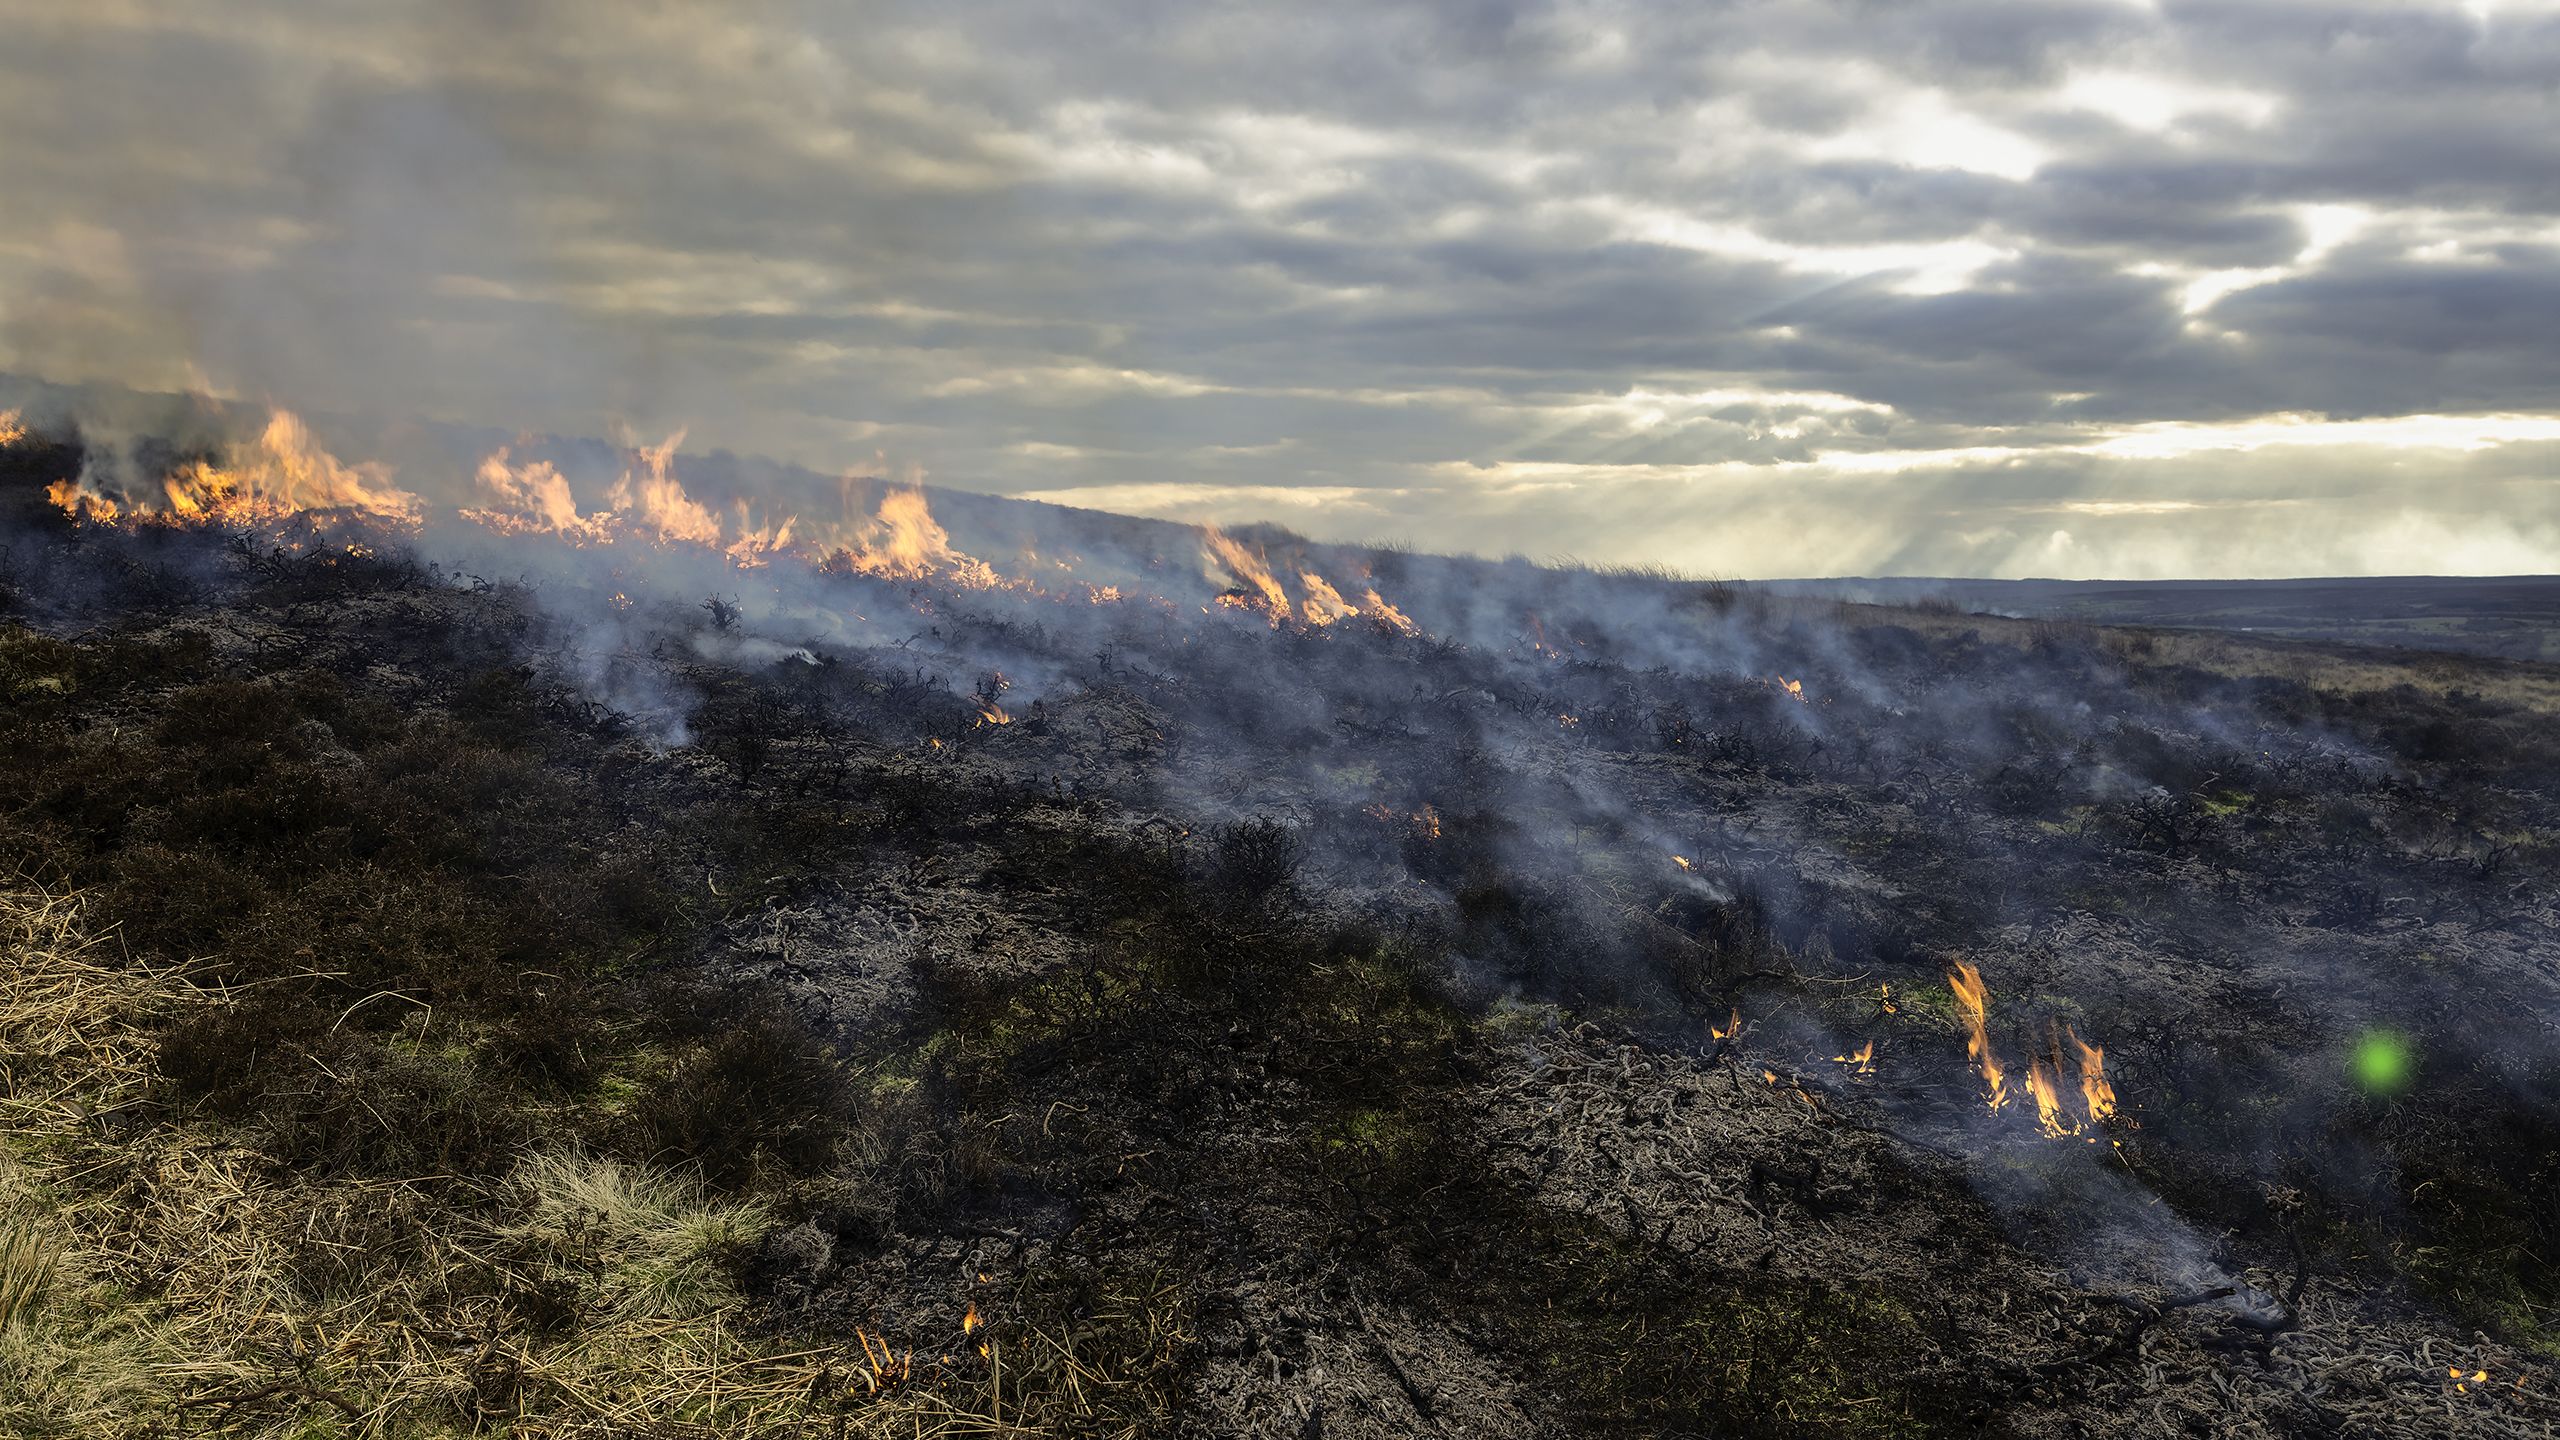 Flames engulf moorland during a dry spell along the North York Moors in late winter near Goathland, Yorkshire, UK